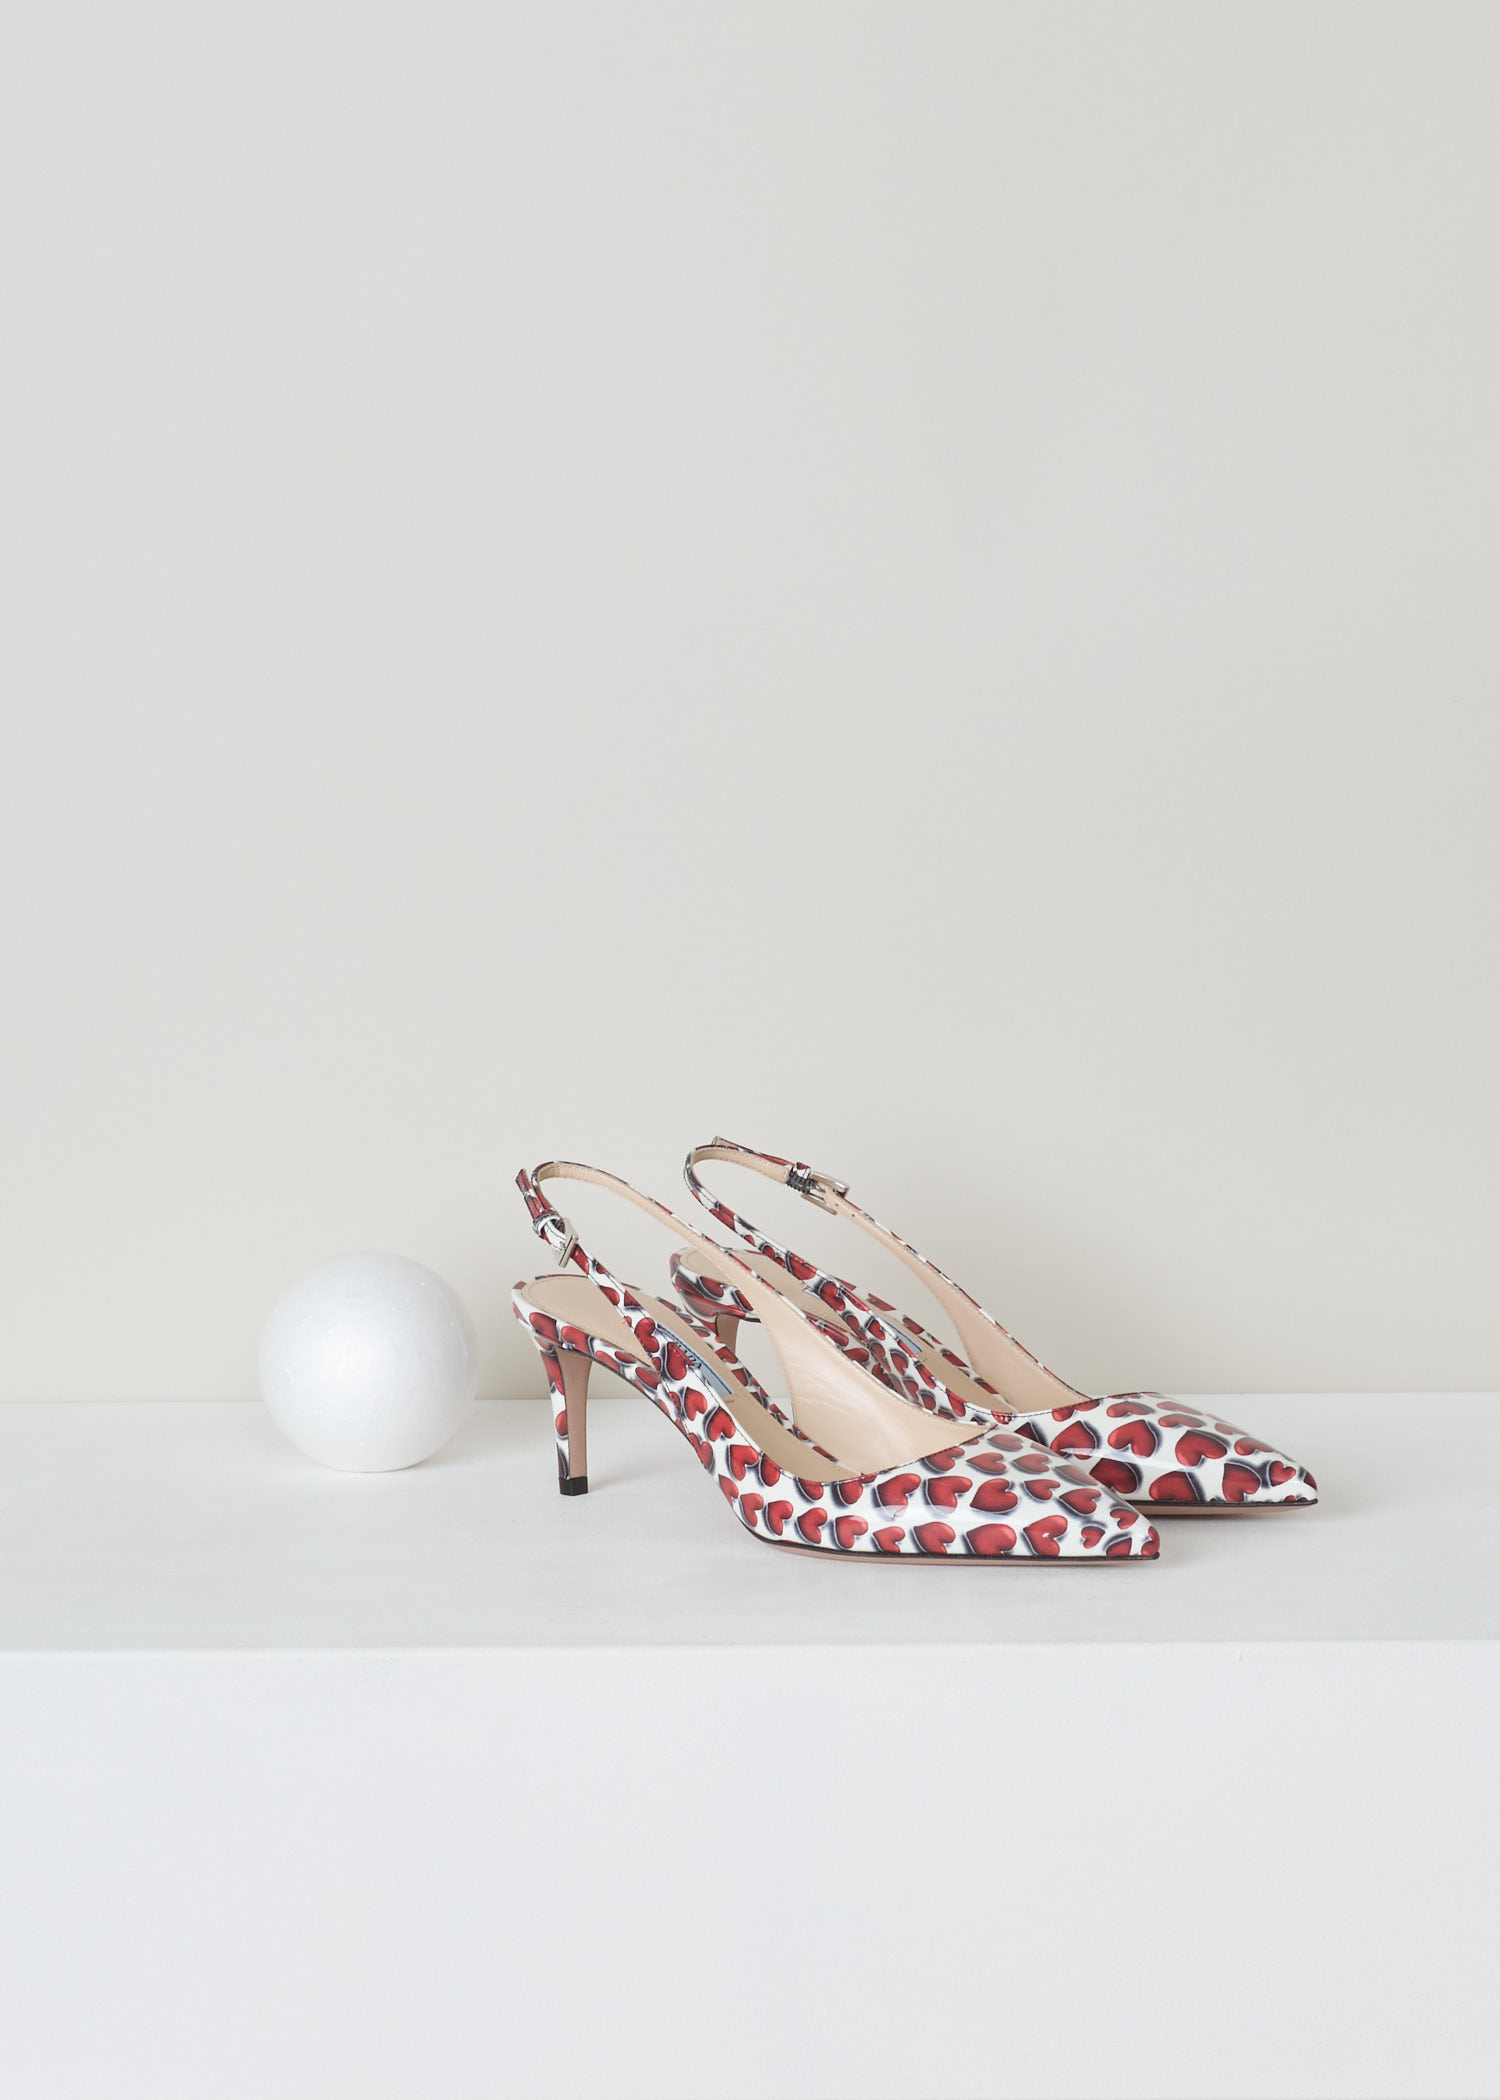 Prada, Red and white patent leather heart print, vernice_cuori_1I833I_F0D56_scarlatto, red white, front, Red and white heart printed slingback. Pointed toe and mid high stiletto heel. With a gold-tone logo plaque on the sole.